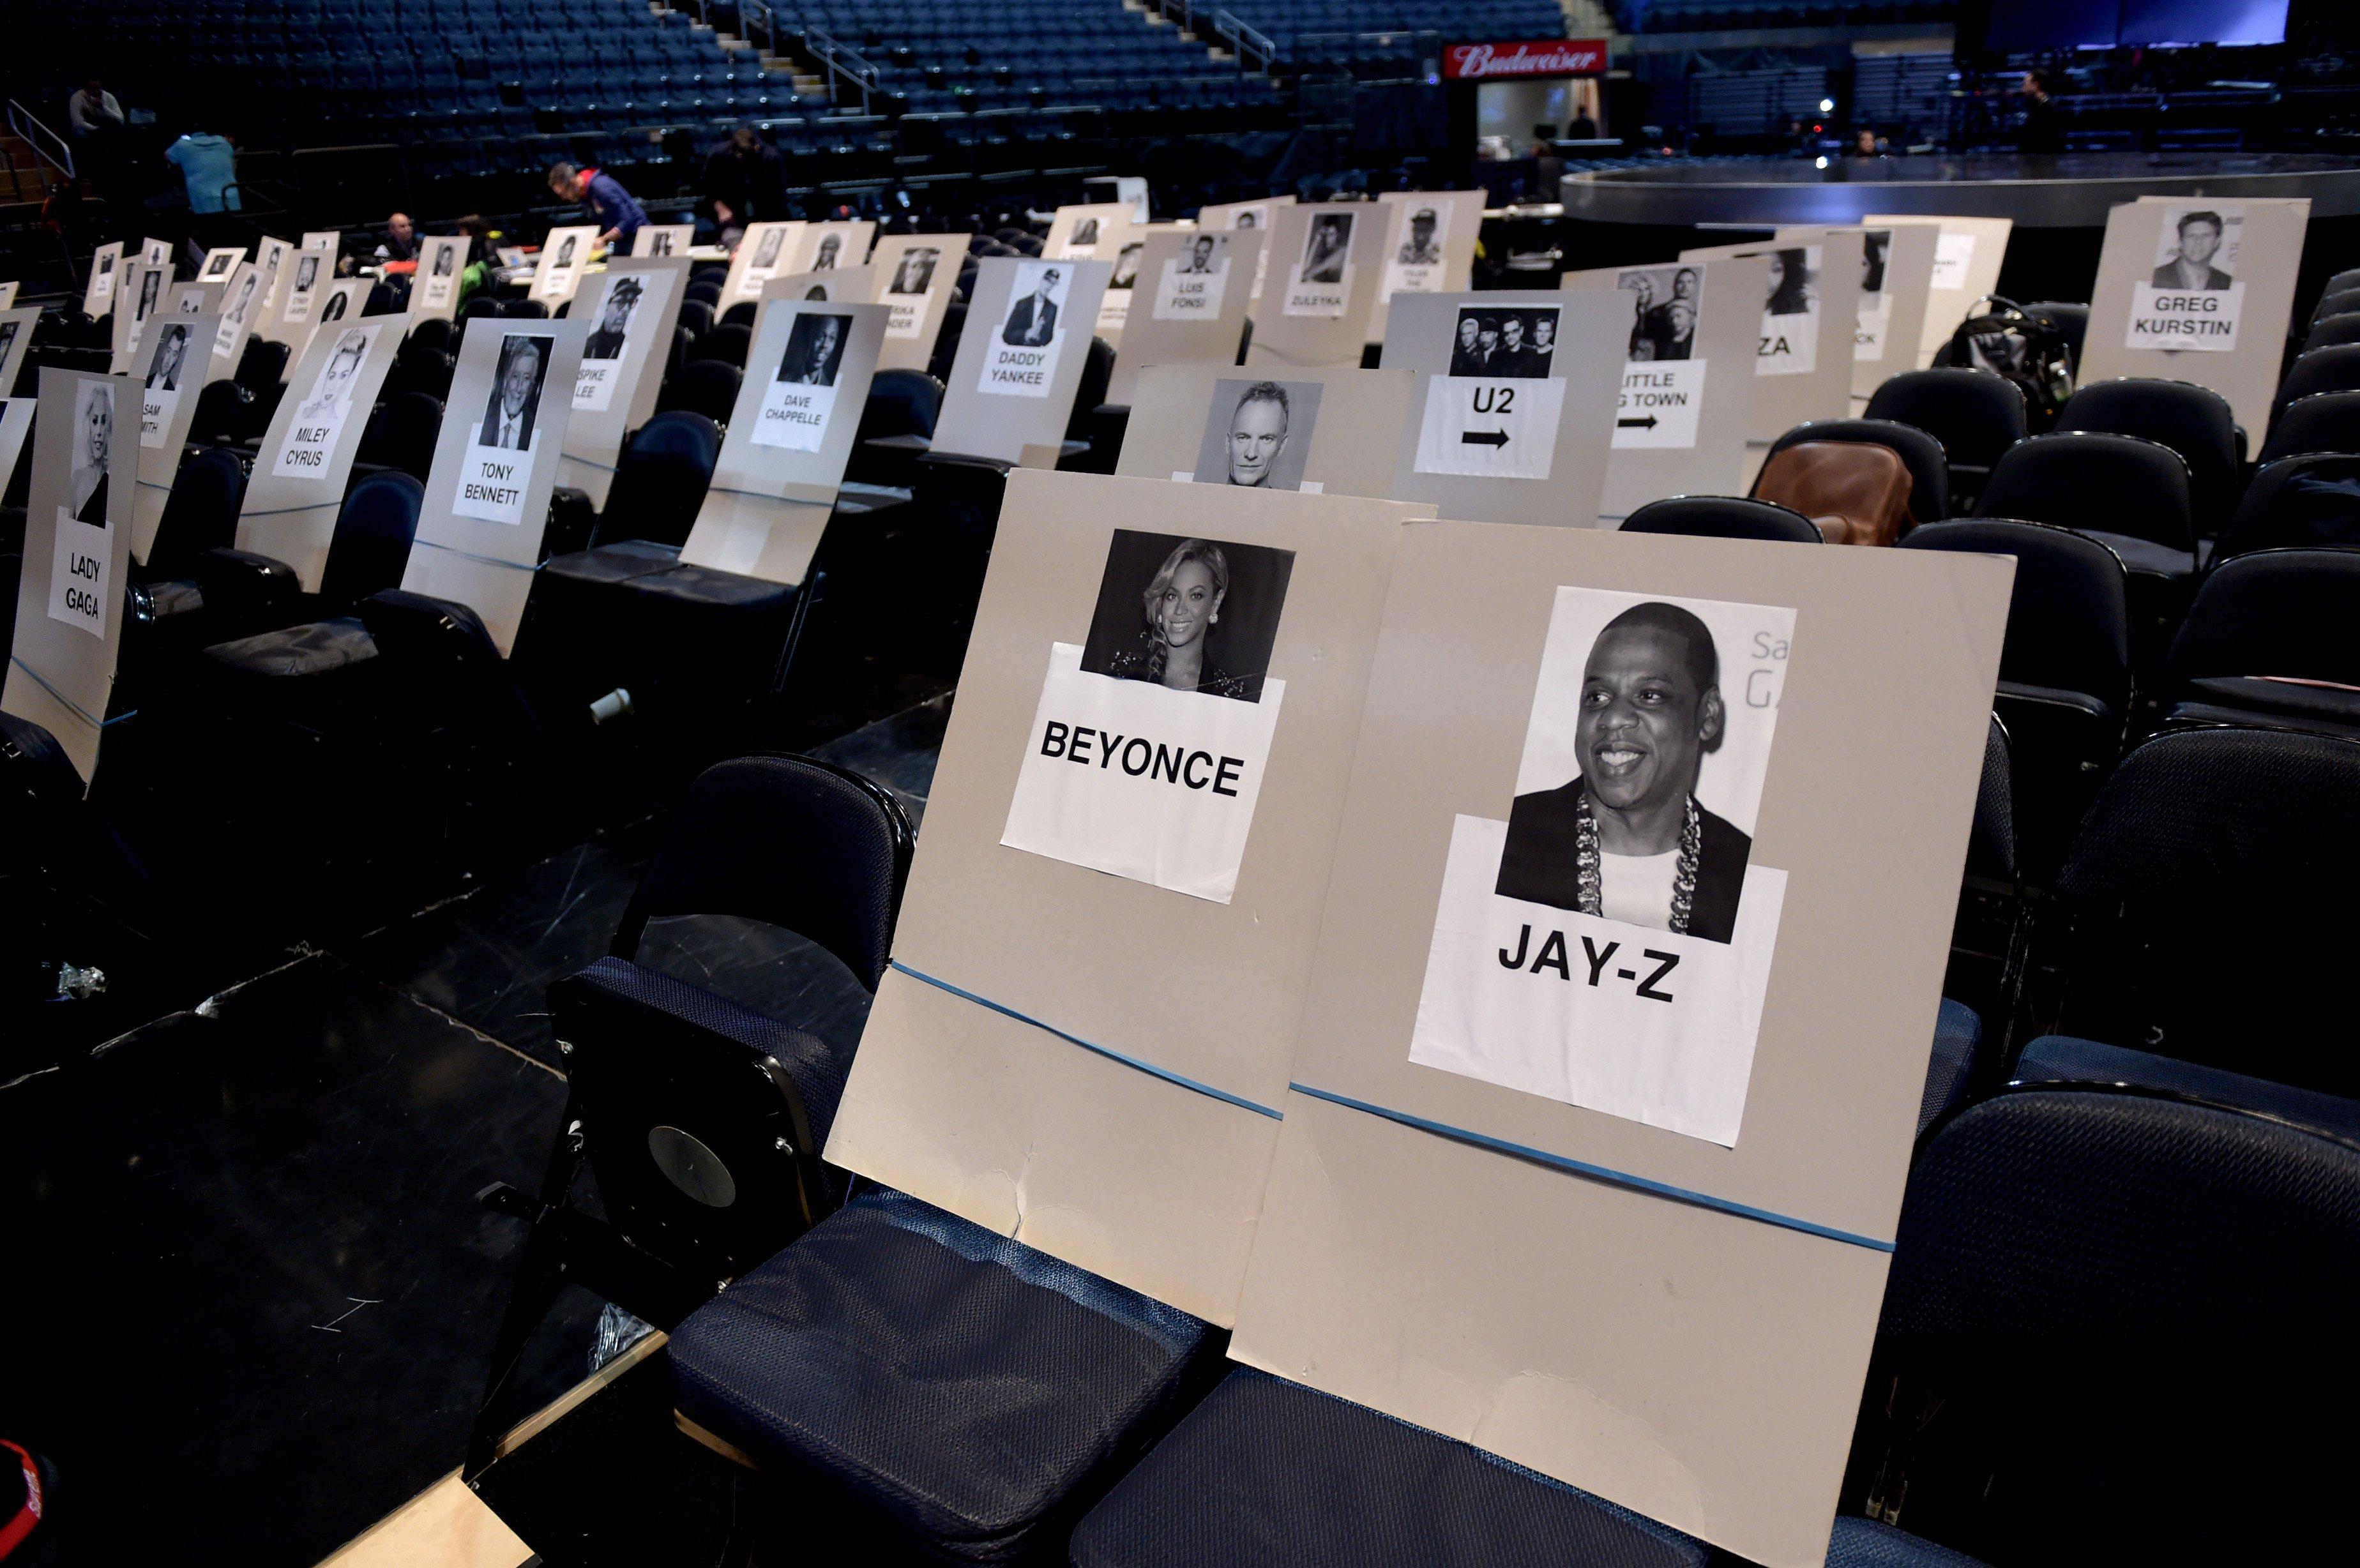 Seat placements at the 60th GRAMMY Awards